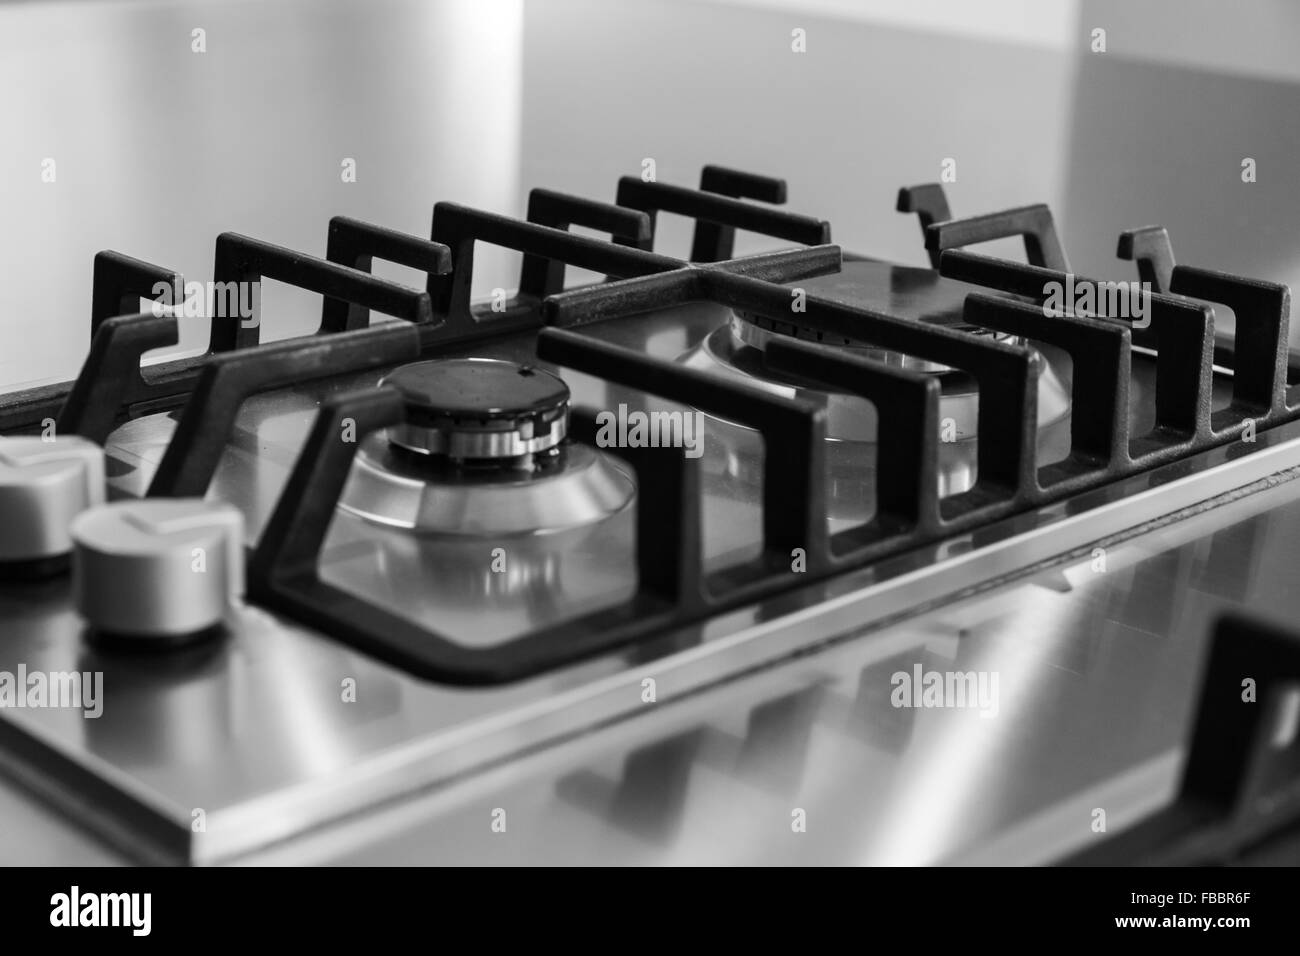 detail of gas stoves, the concept of kitchen Stock Photo